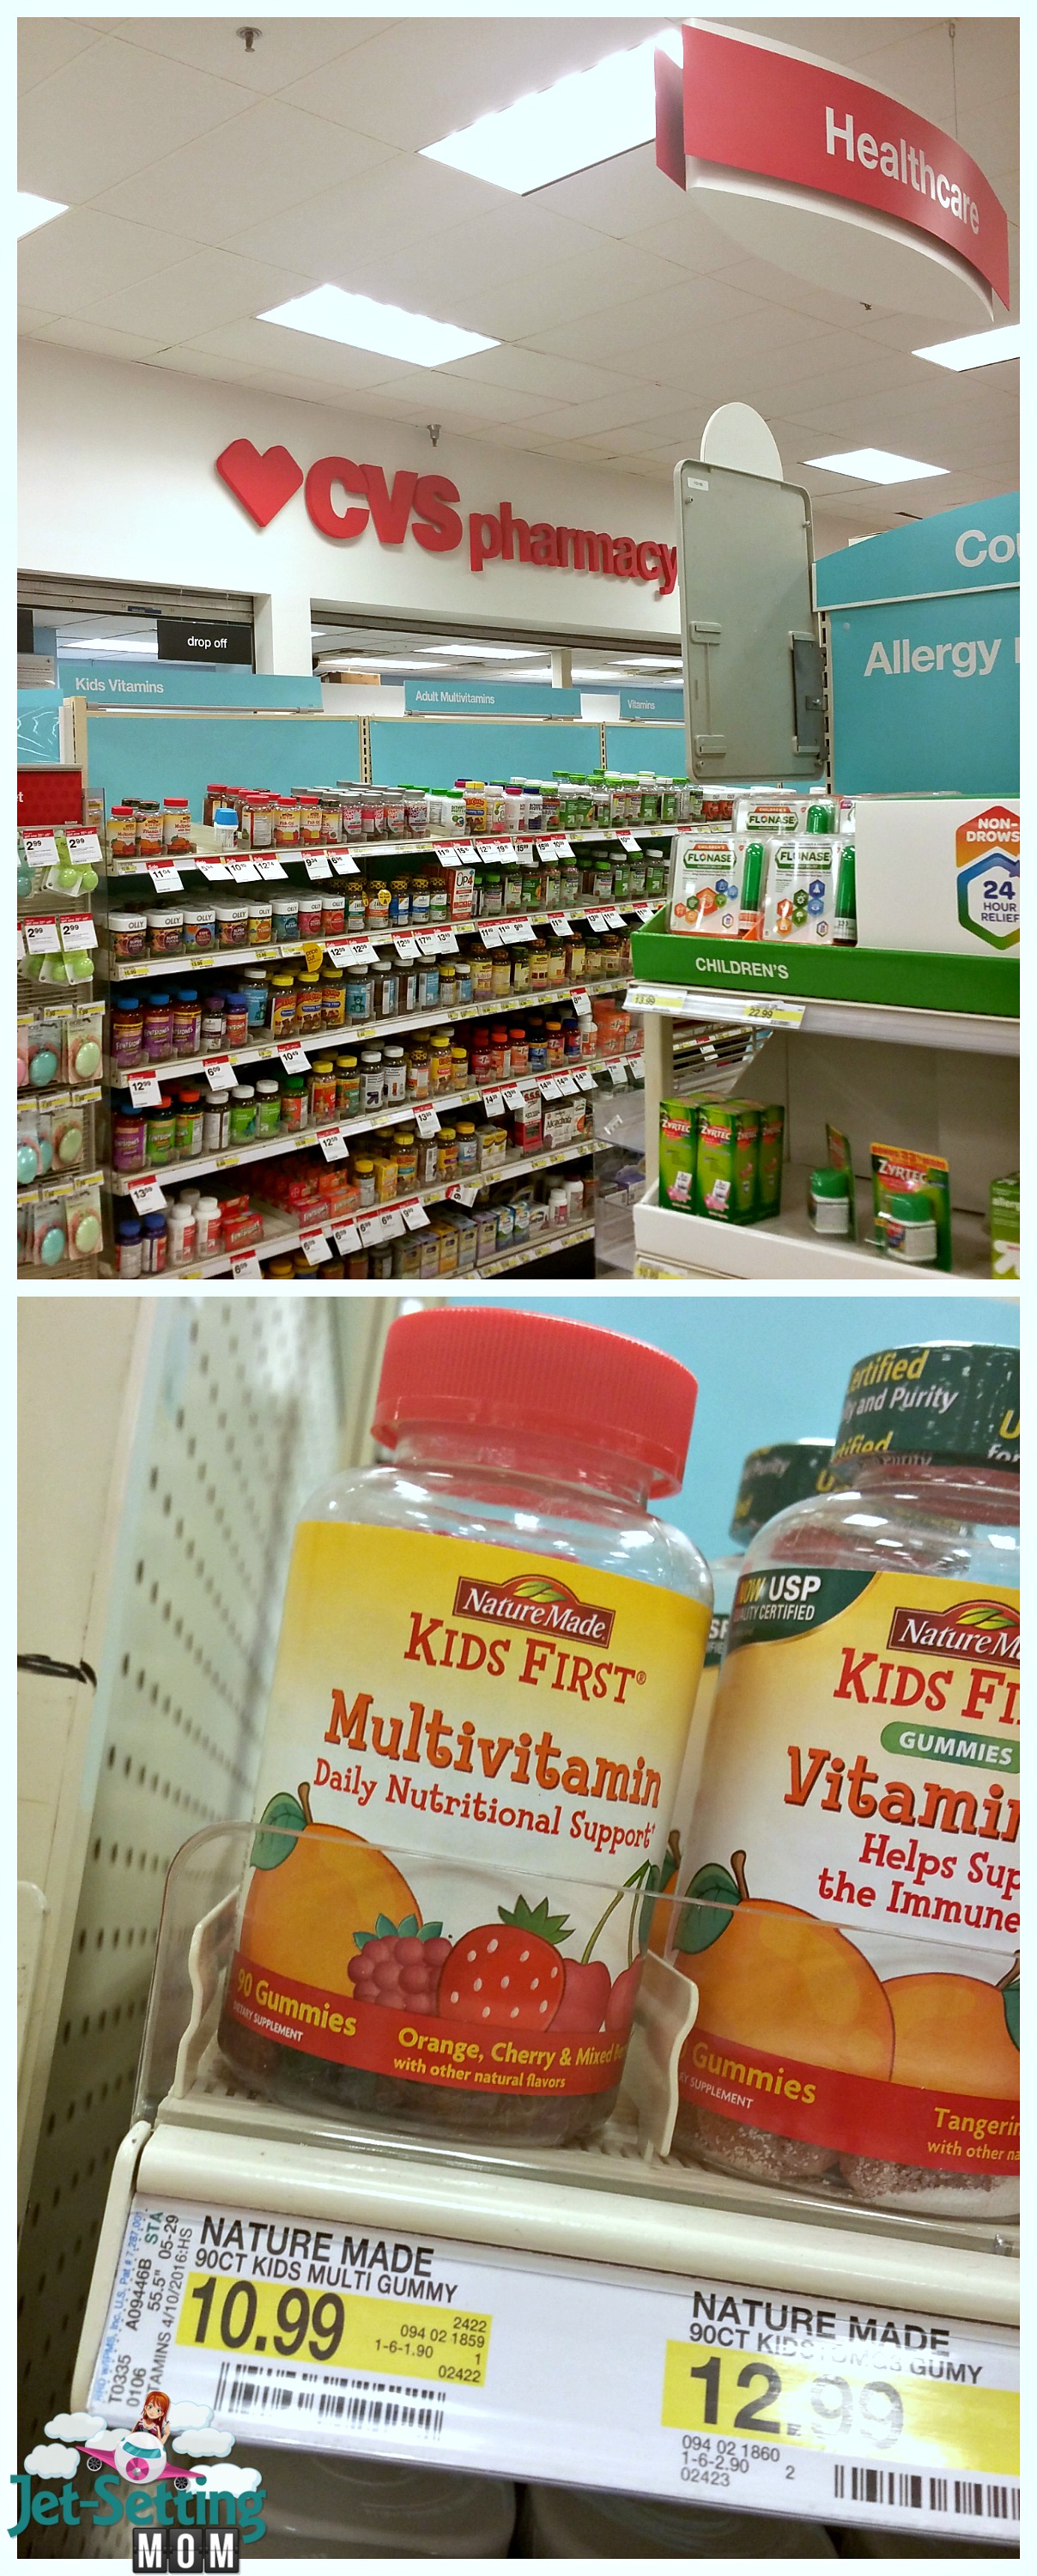 -Nature Made® KIDS FIRST® Multivitamin  are now at Target. #NatureMadeAtTarget #ad #IC